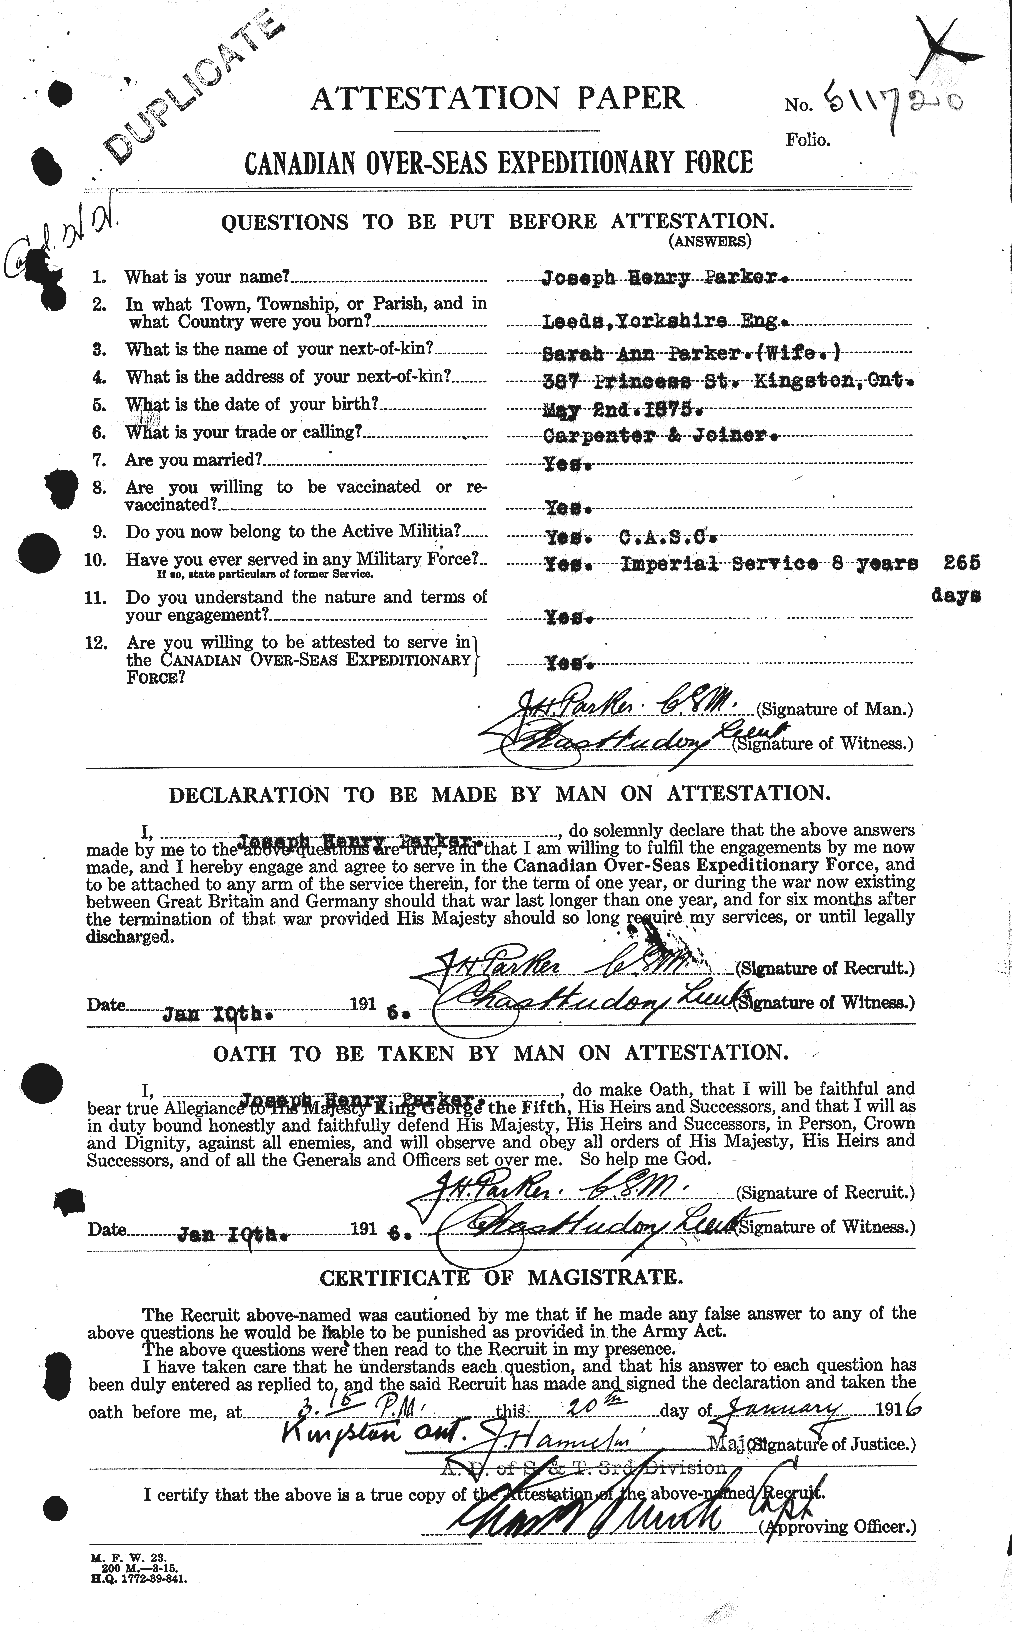 Personnel Records of the First World War - CEF 565507a